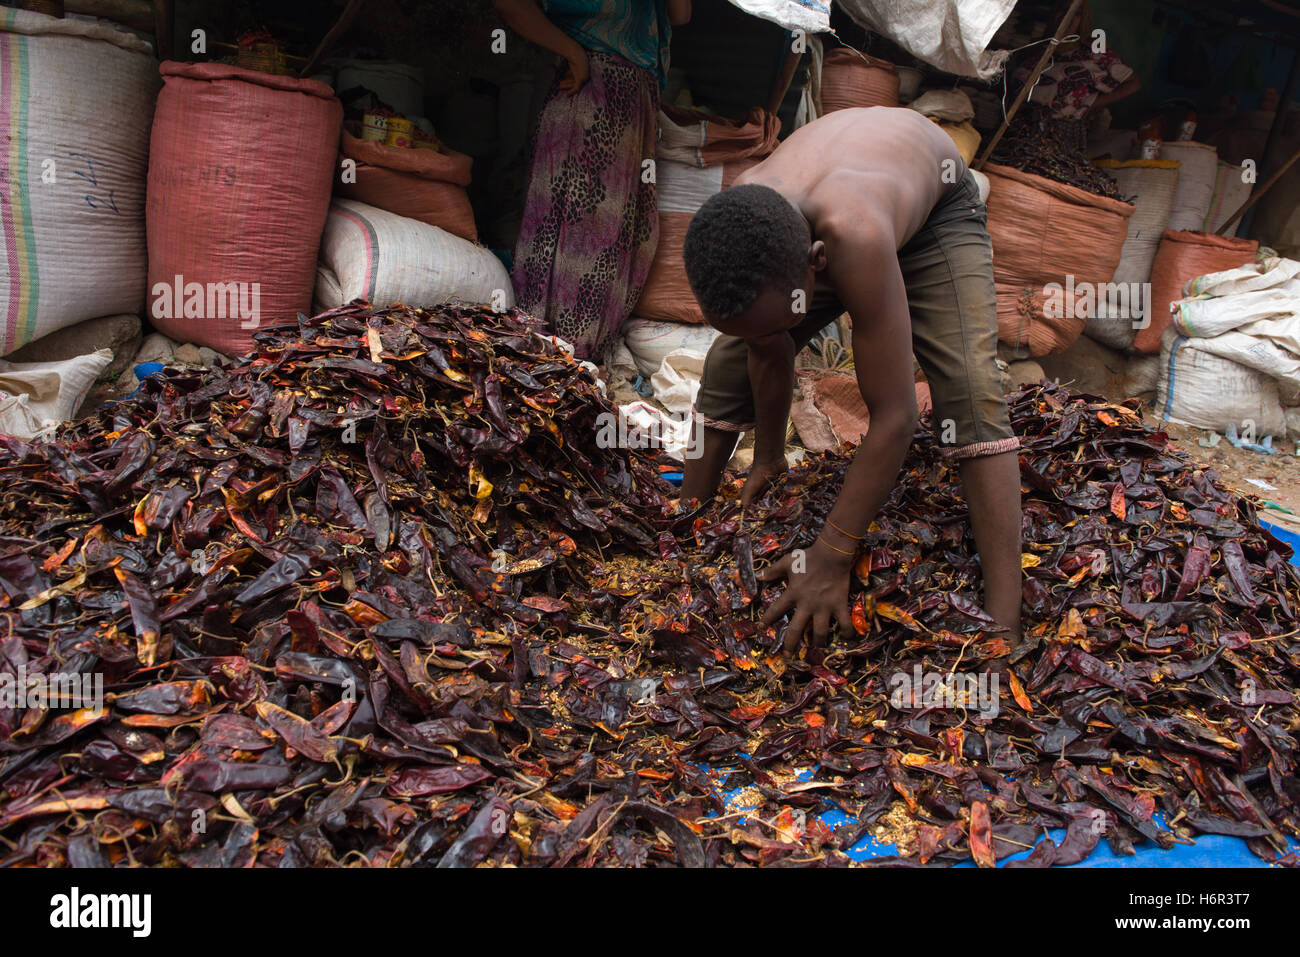 Young boy sorting a pile of dried chillis on the floor of the market at Dire Dawa, Ethiopia Stock Photo